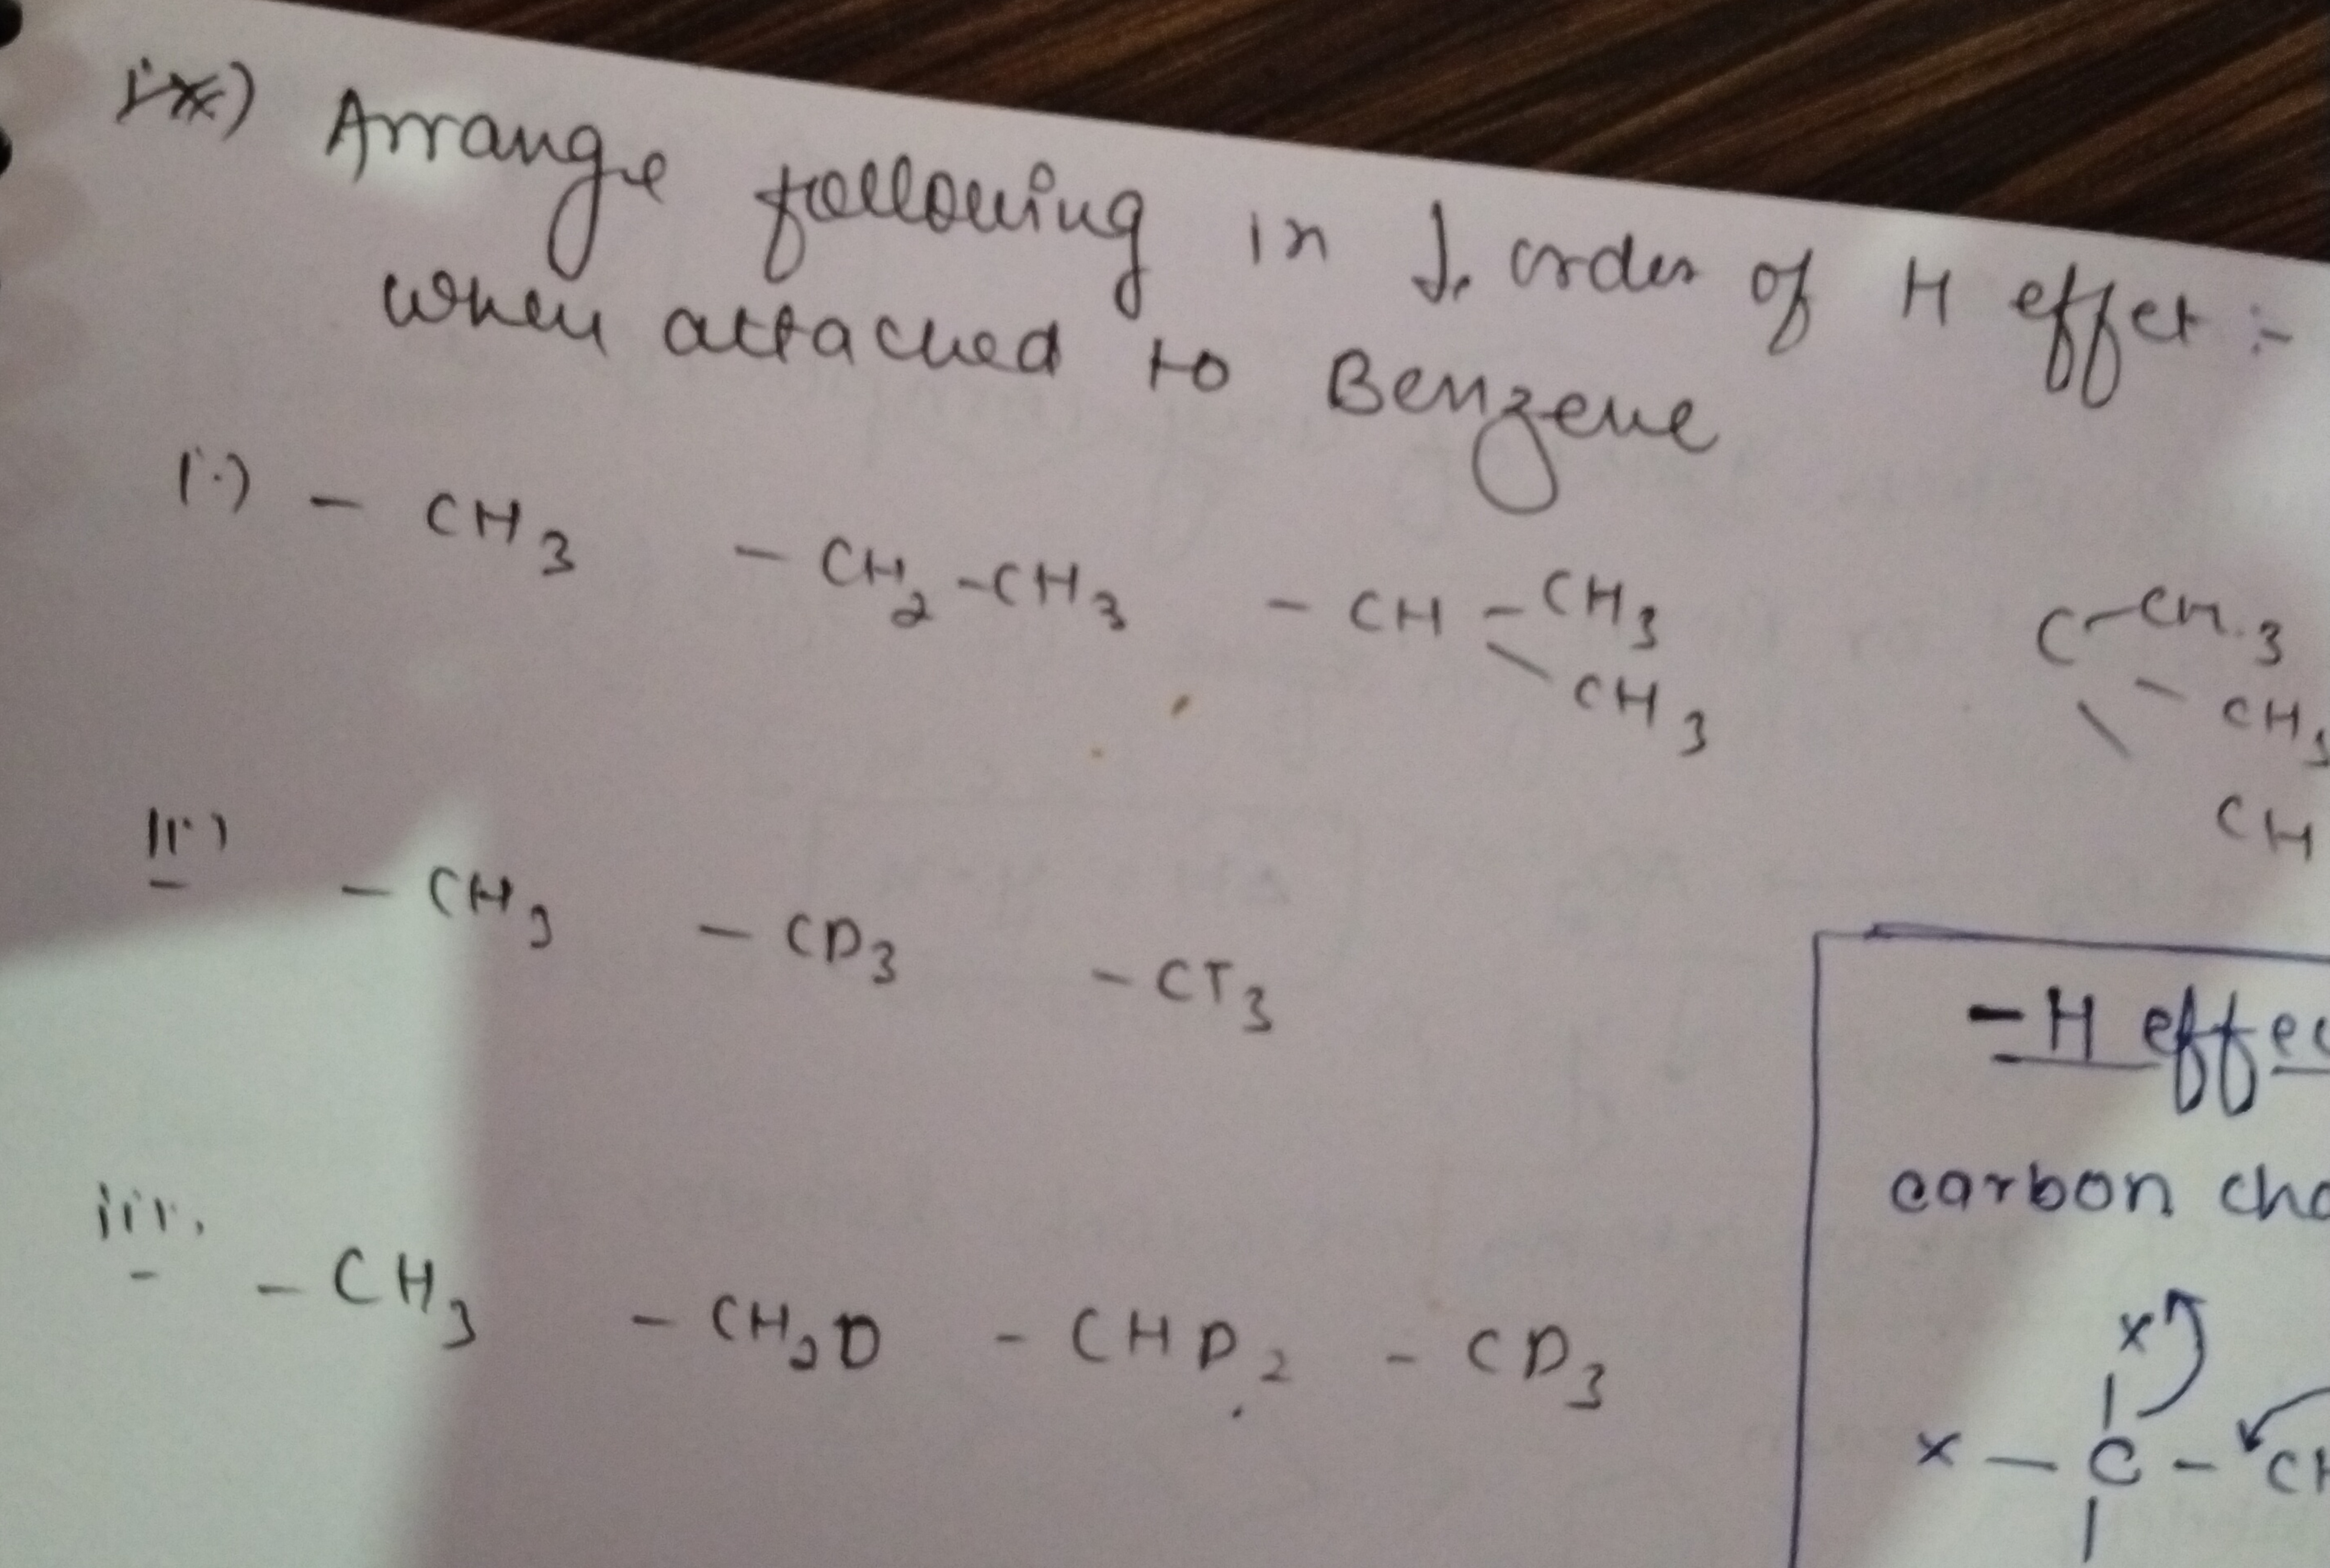 ix) Arrange following in J codes of H eff et:when attached to Benzene